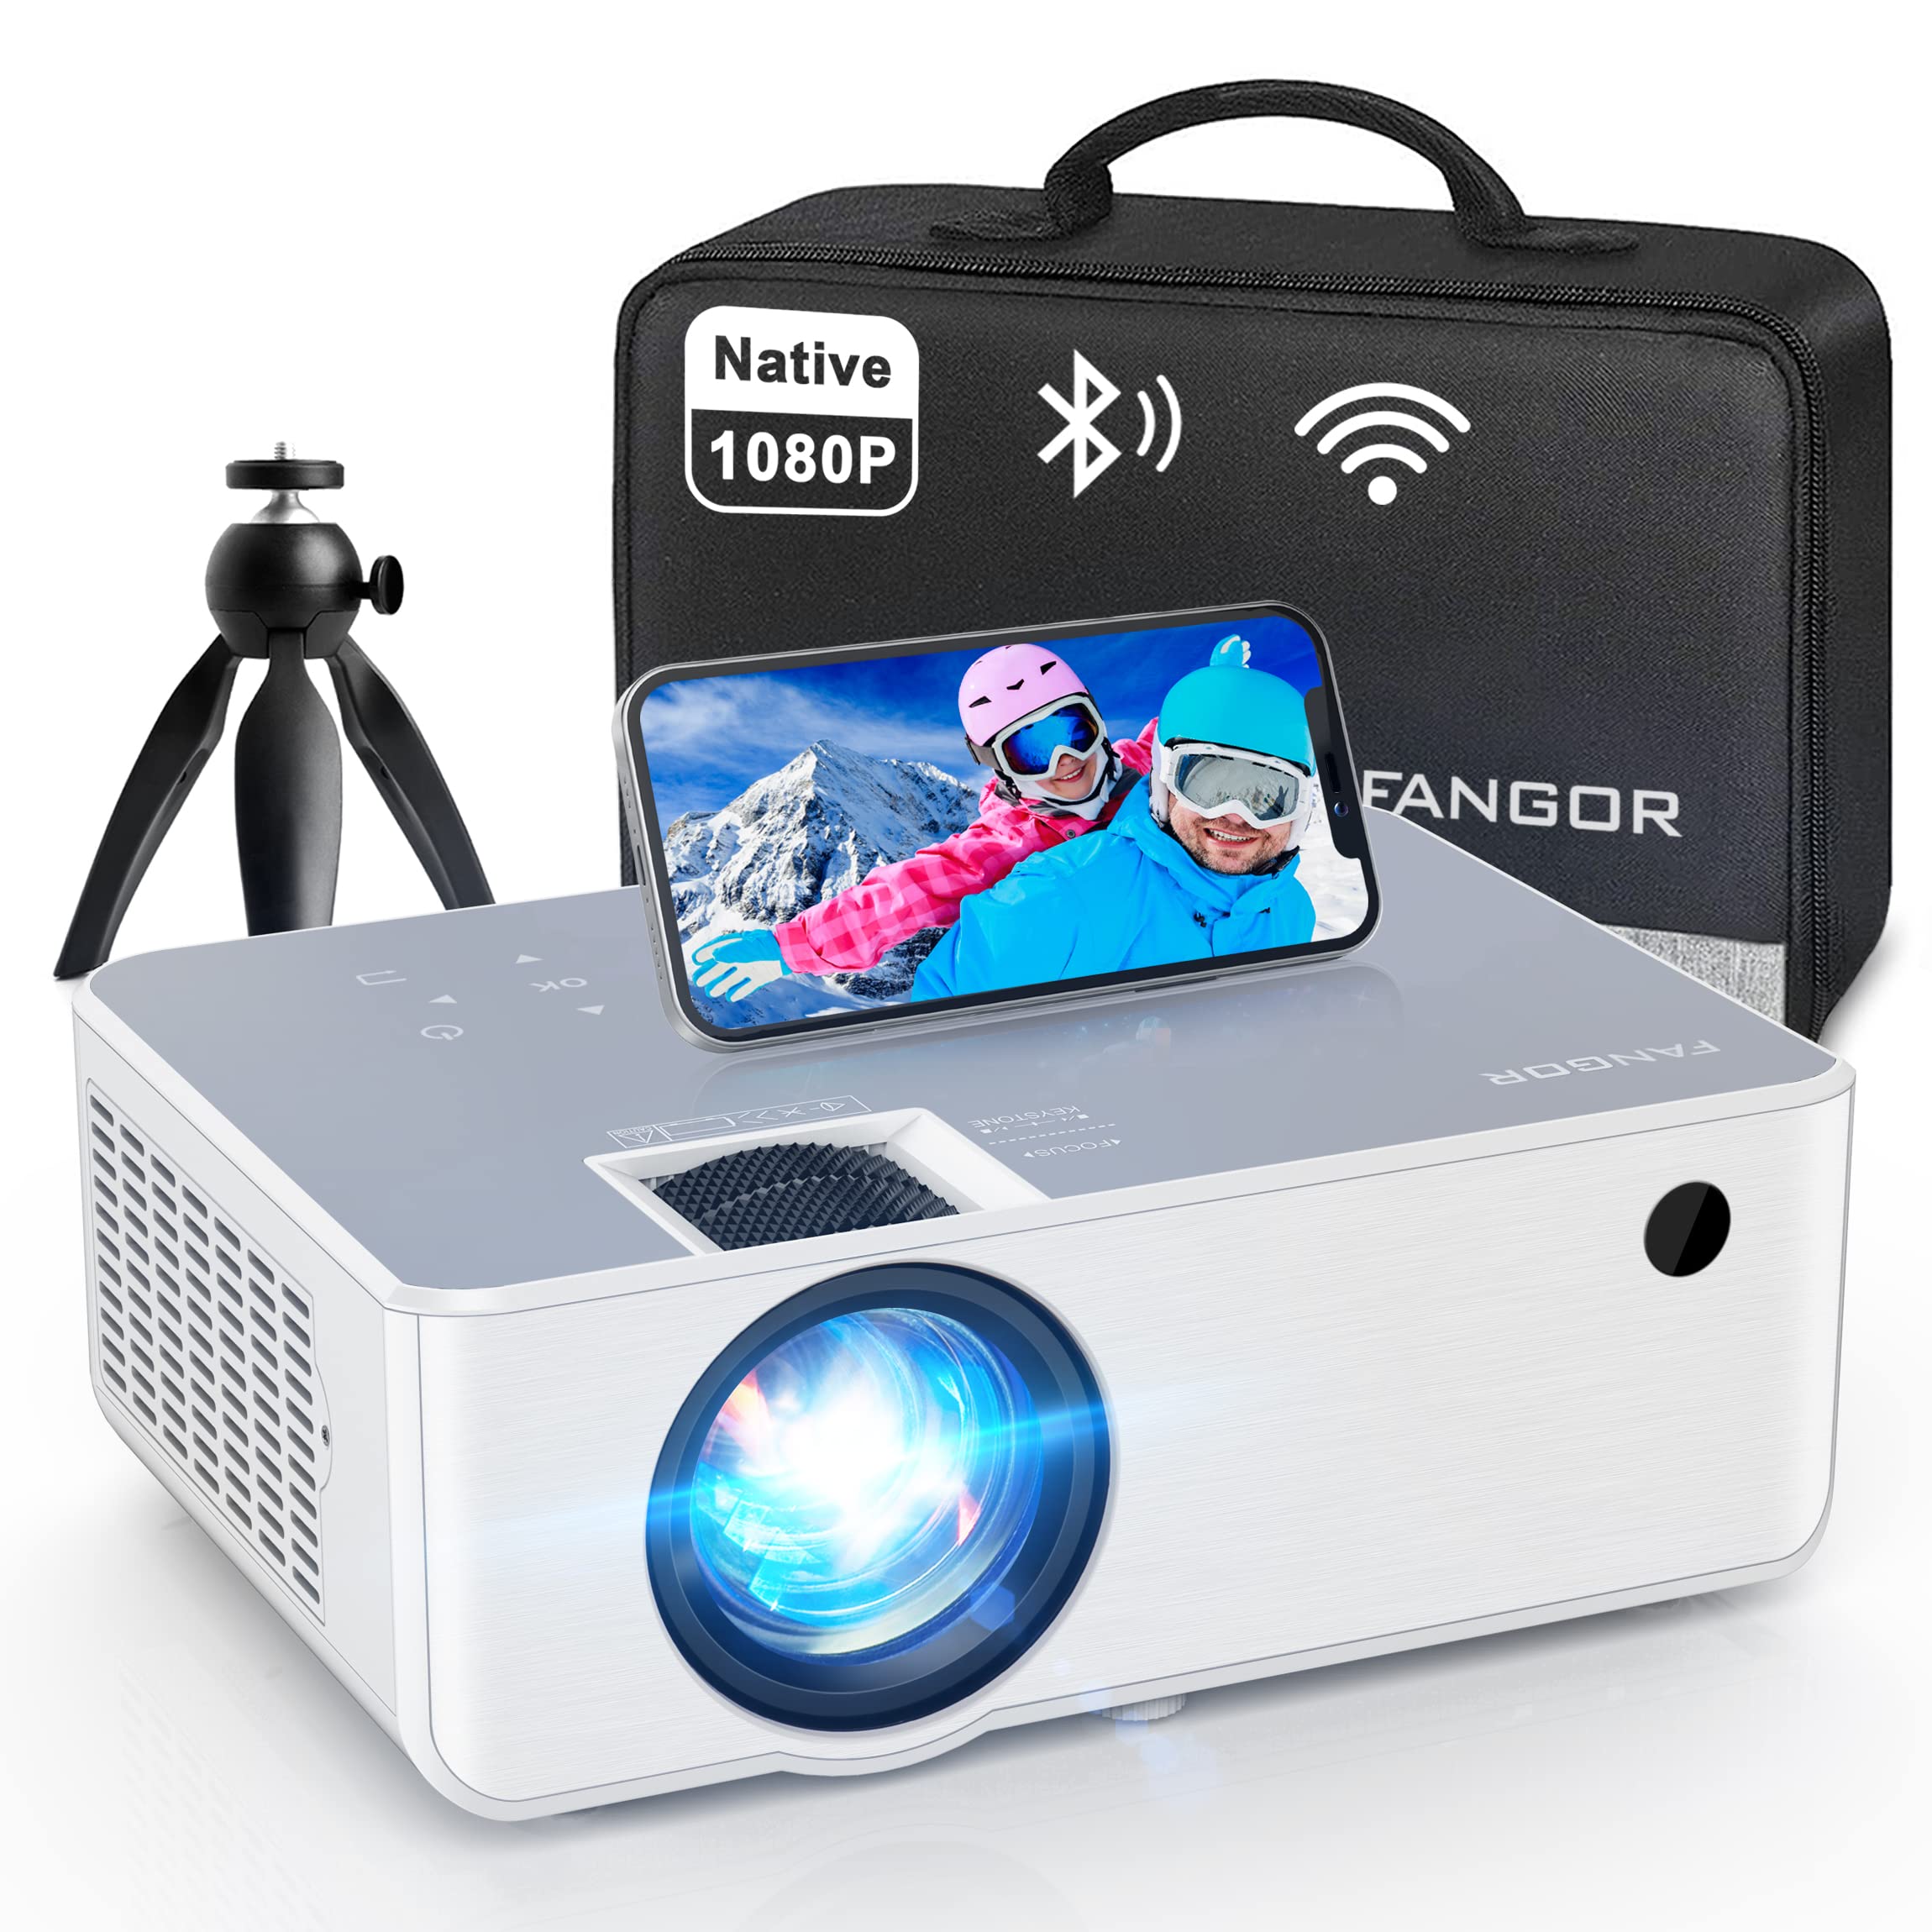 FANGOR 1080P HD Projector, WiFi Bluetooth Projectors, Max 230”Projection Screen Portable Home Theater Video Movie Proyector With Tripod, Compatible with HDMI, VGA, USB, Laptop, iOS & Android Phone